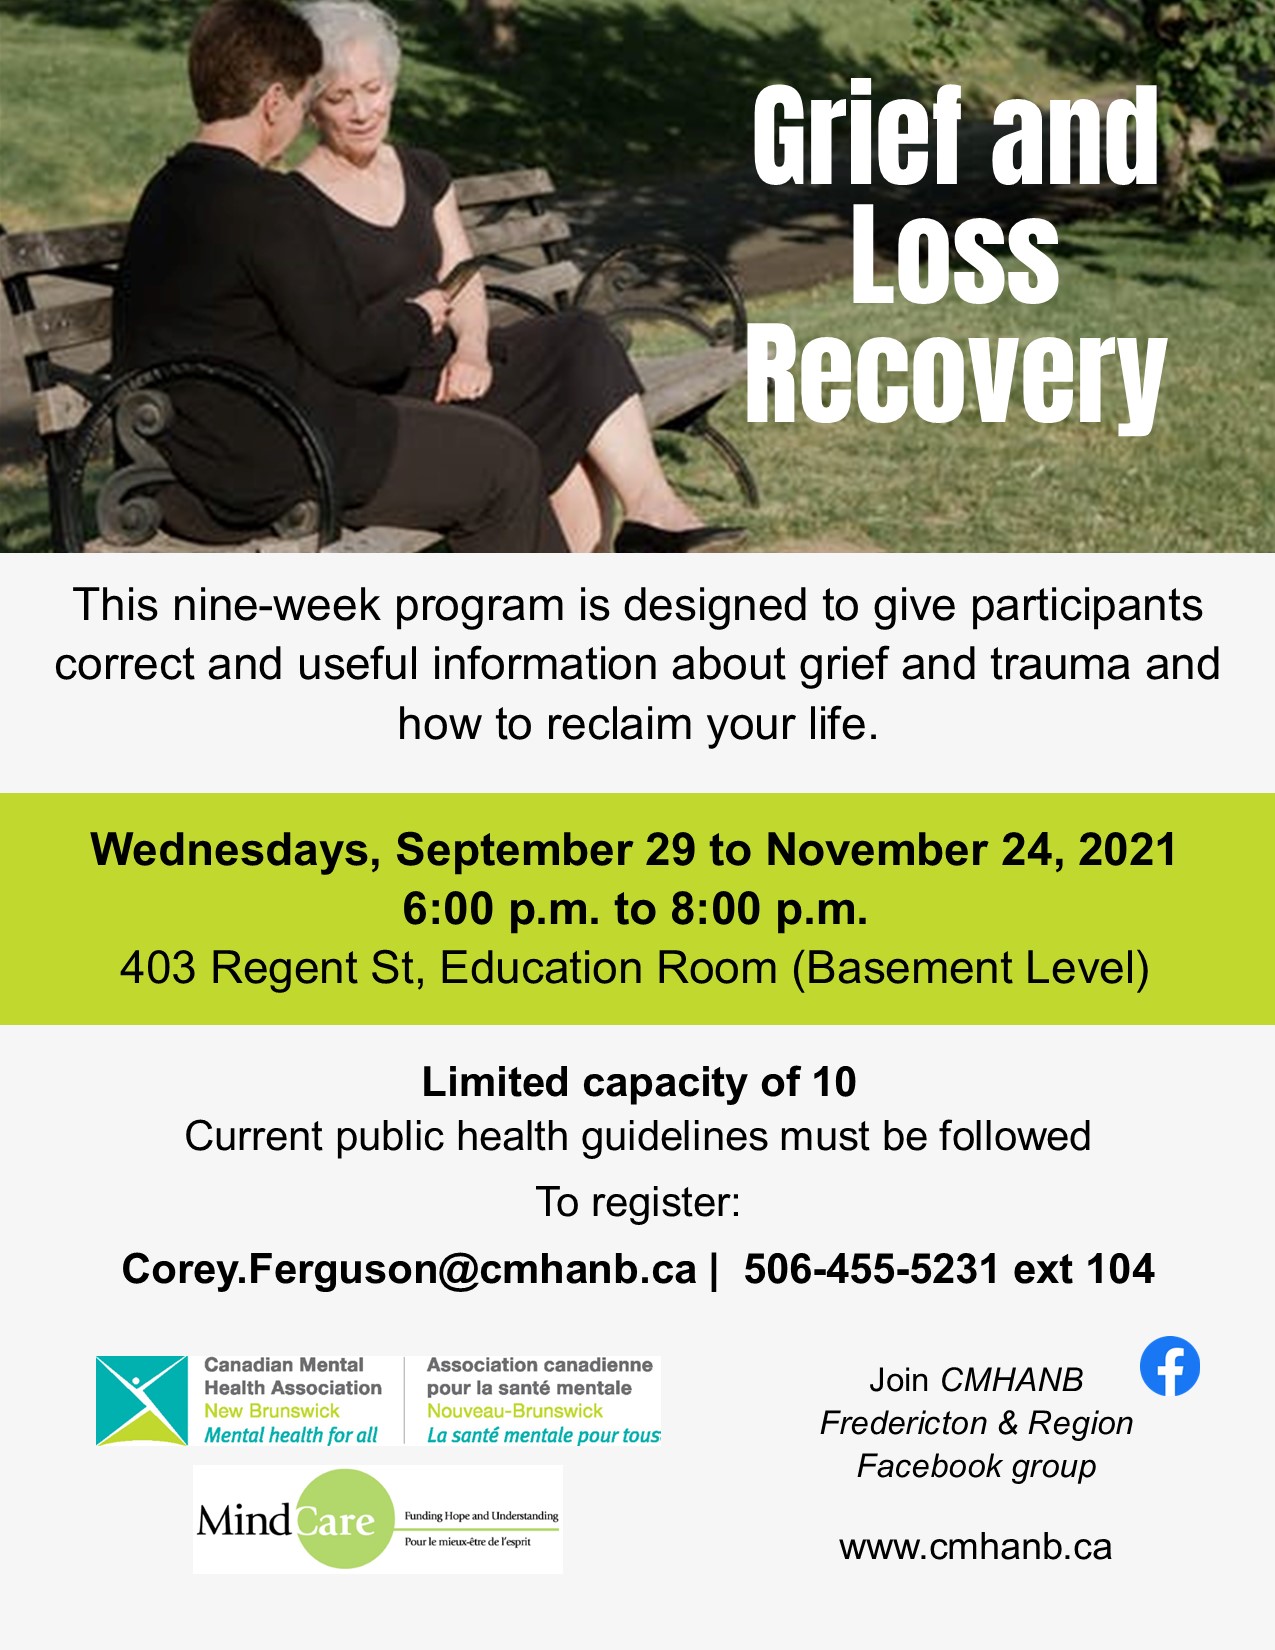 Grief and Loss Recovery (Fredericton)